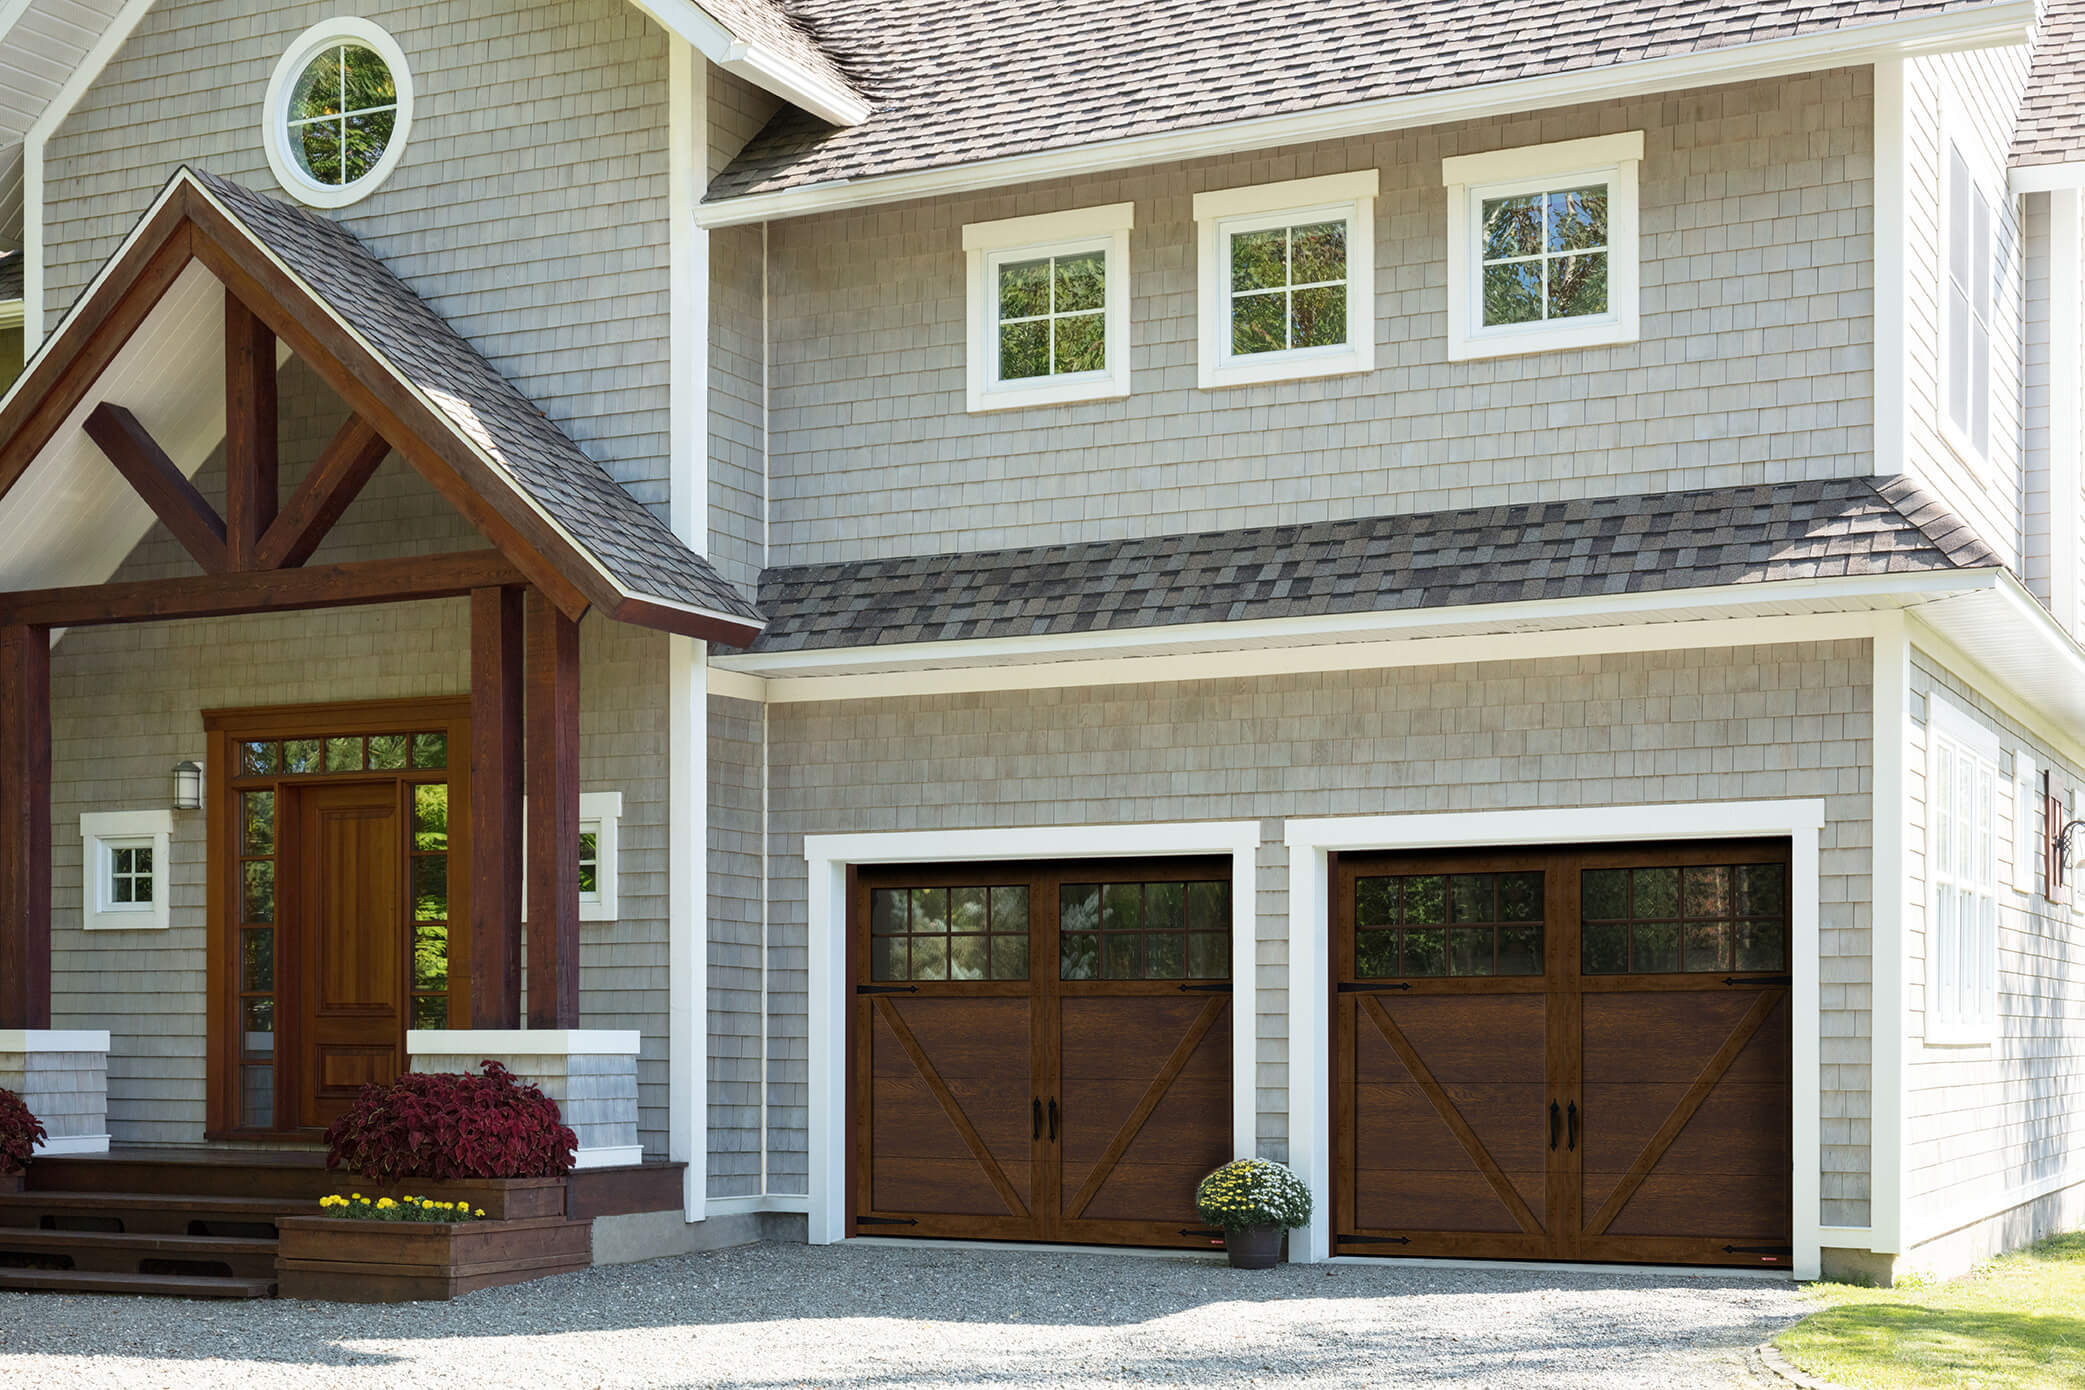 Simple Garage Doors Doctor for Small Space